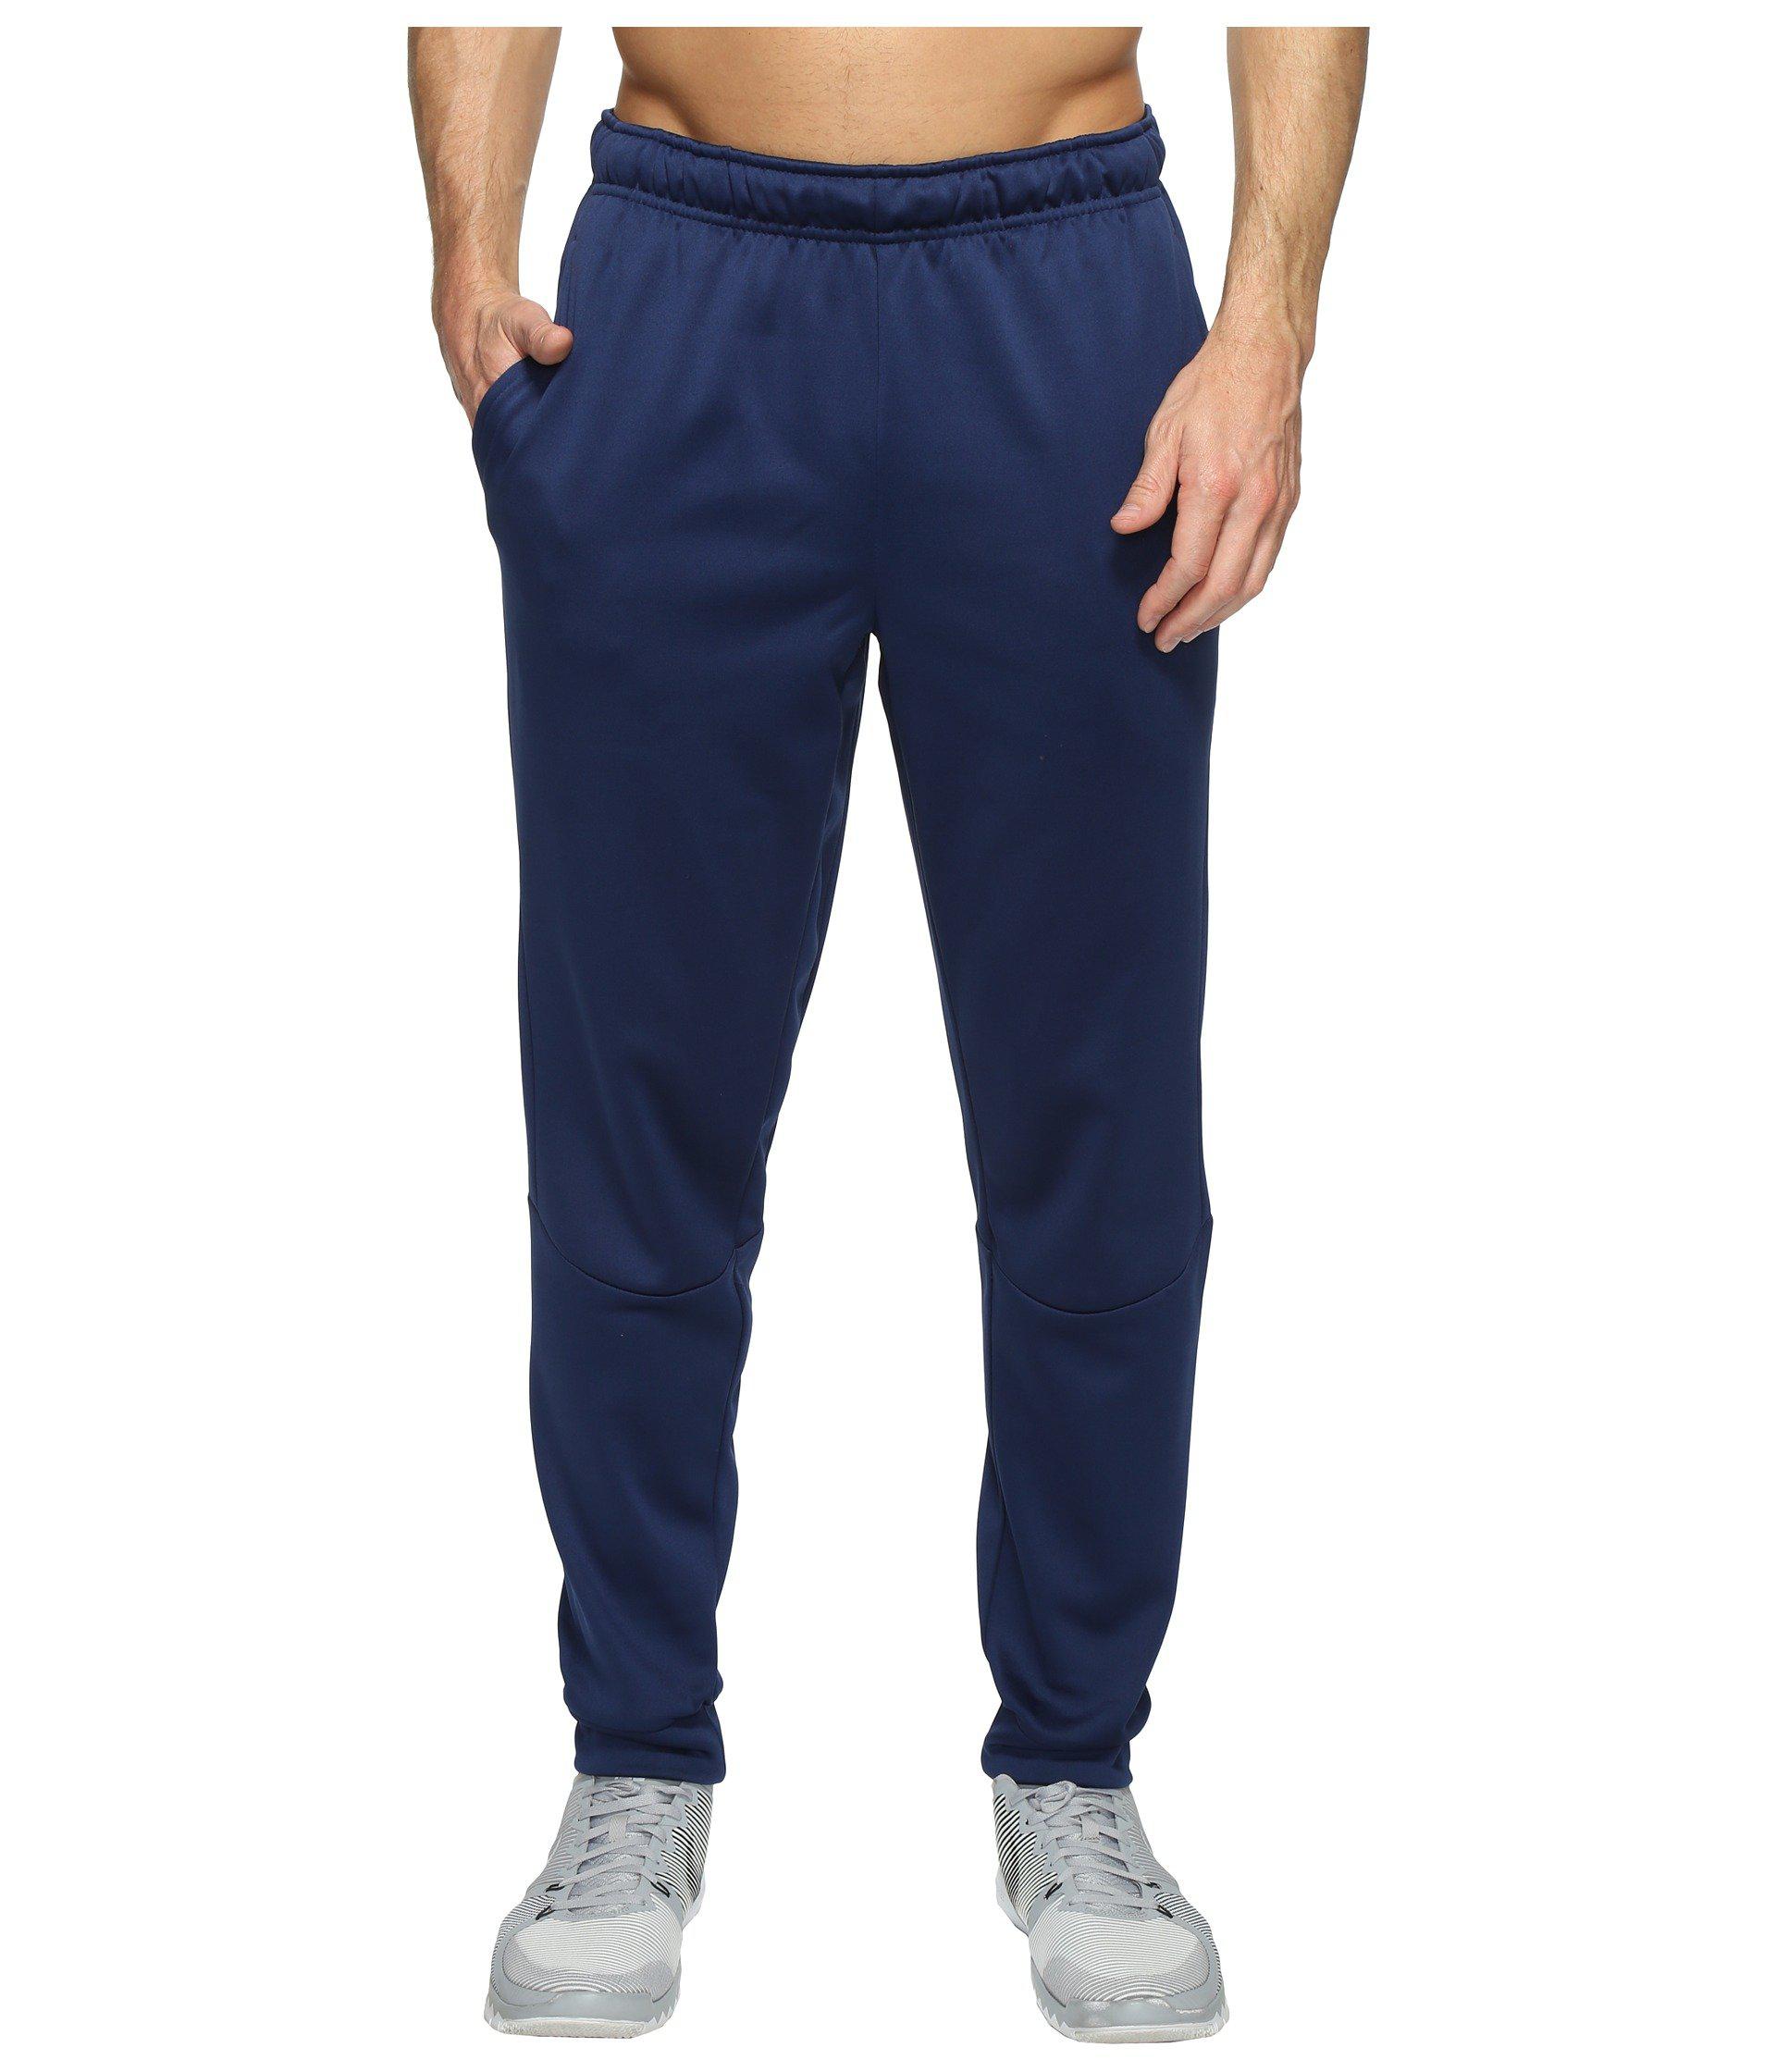 Nike Therma Tapered Training Pant in Blue for Men - Lyst